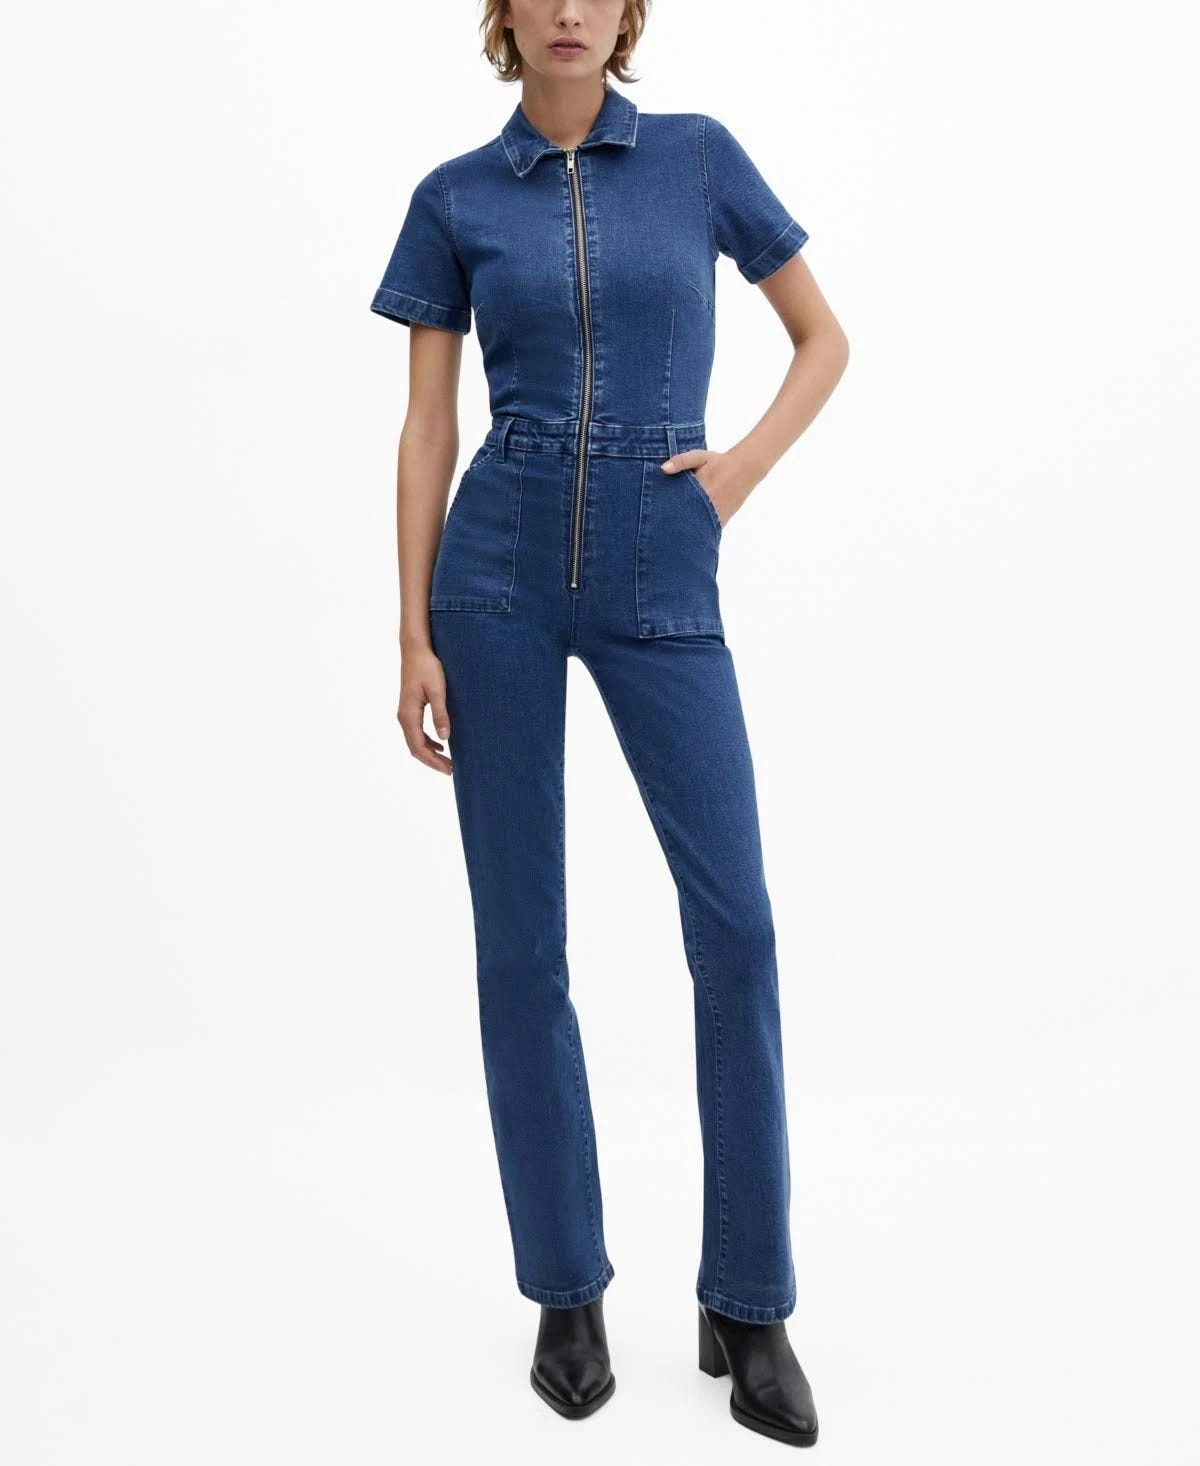 Petite Denim Jumpsuit with Classic Collar and Zipper Detail | Image